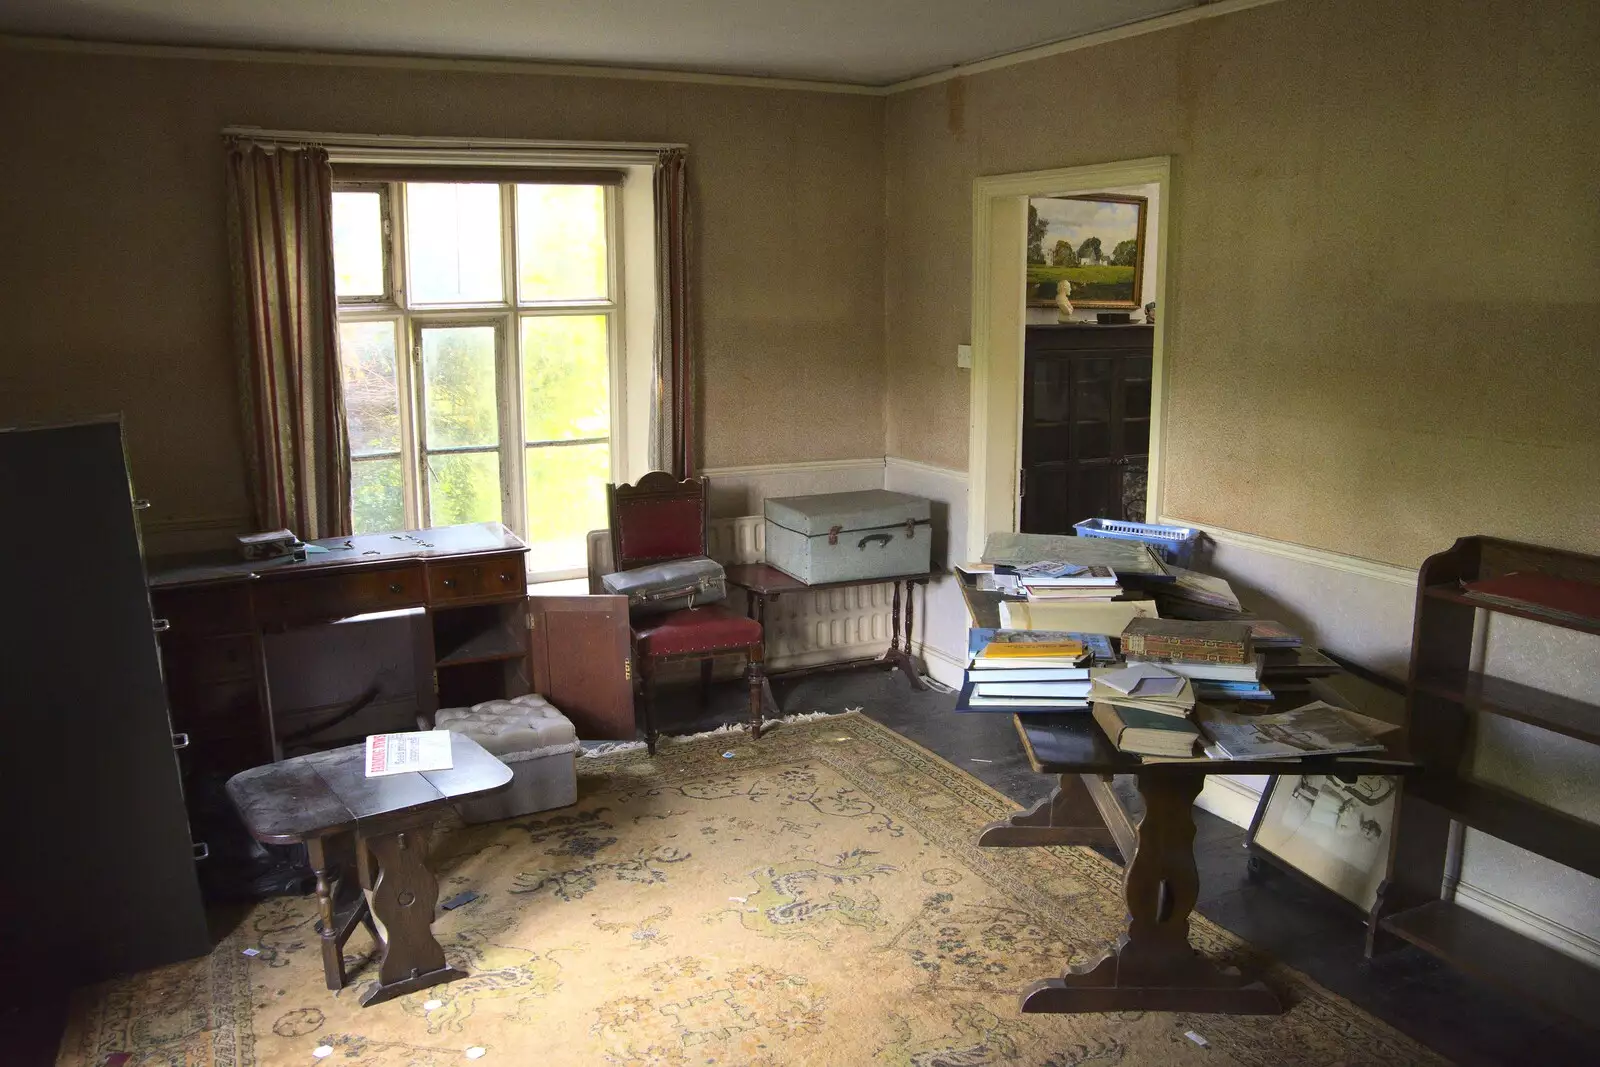 Yet another drawing room, from A 1940s Timewarp, Site 4, Bungay Airfield, Flixton, Suffolk - 9th June 2022